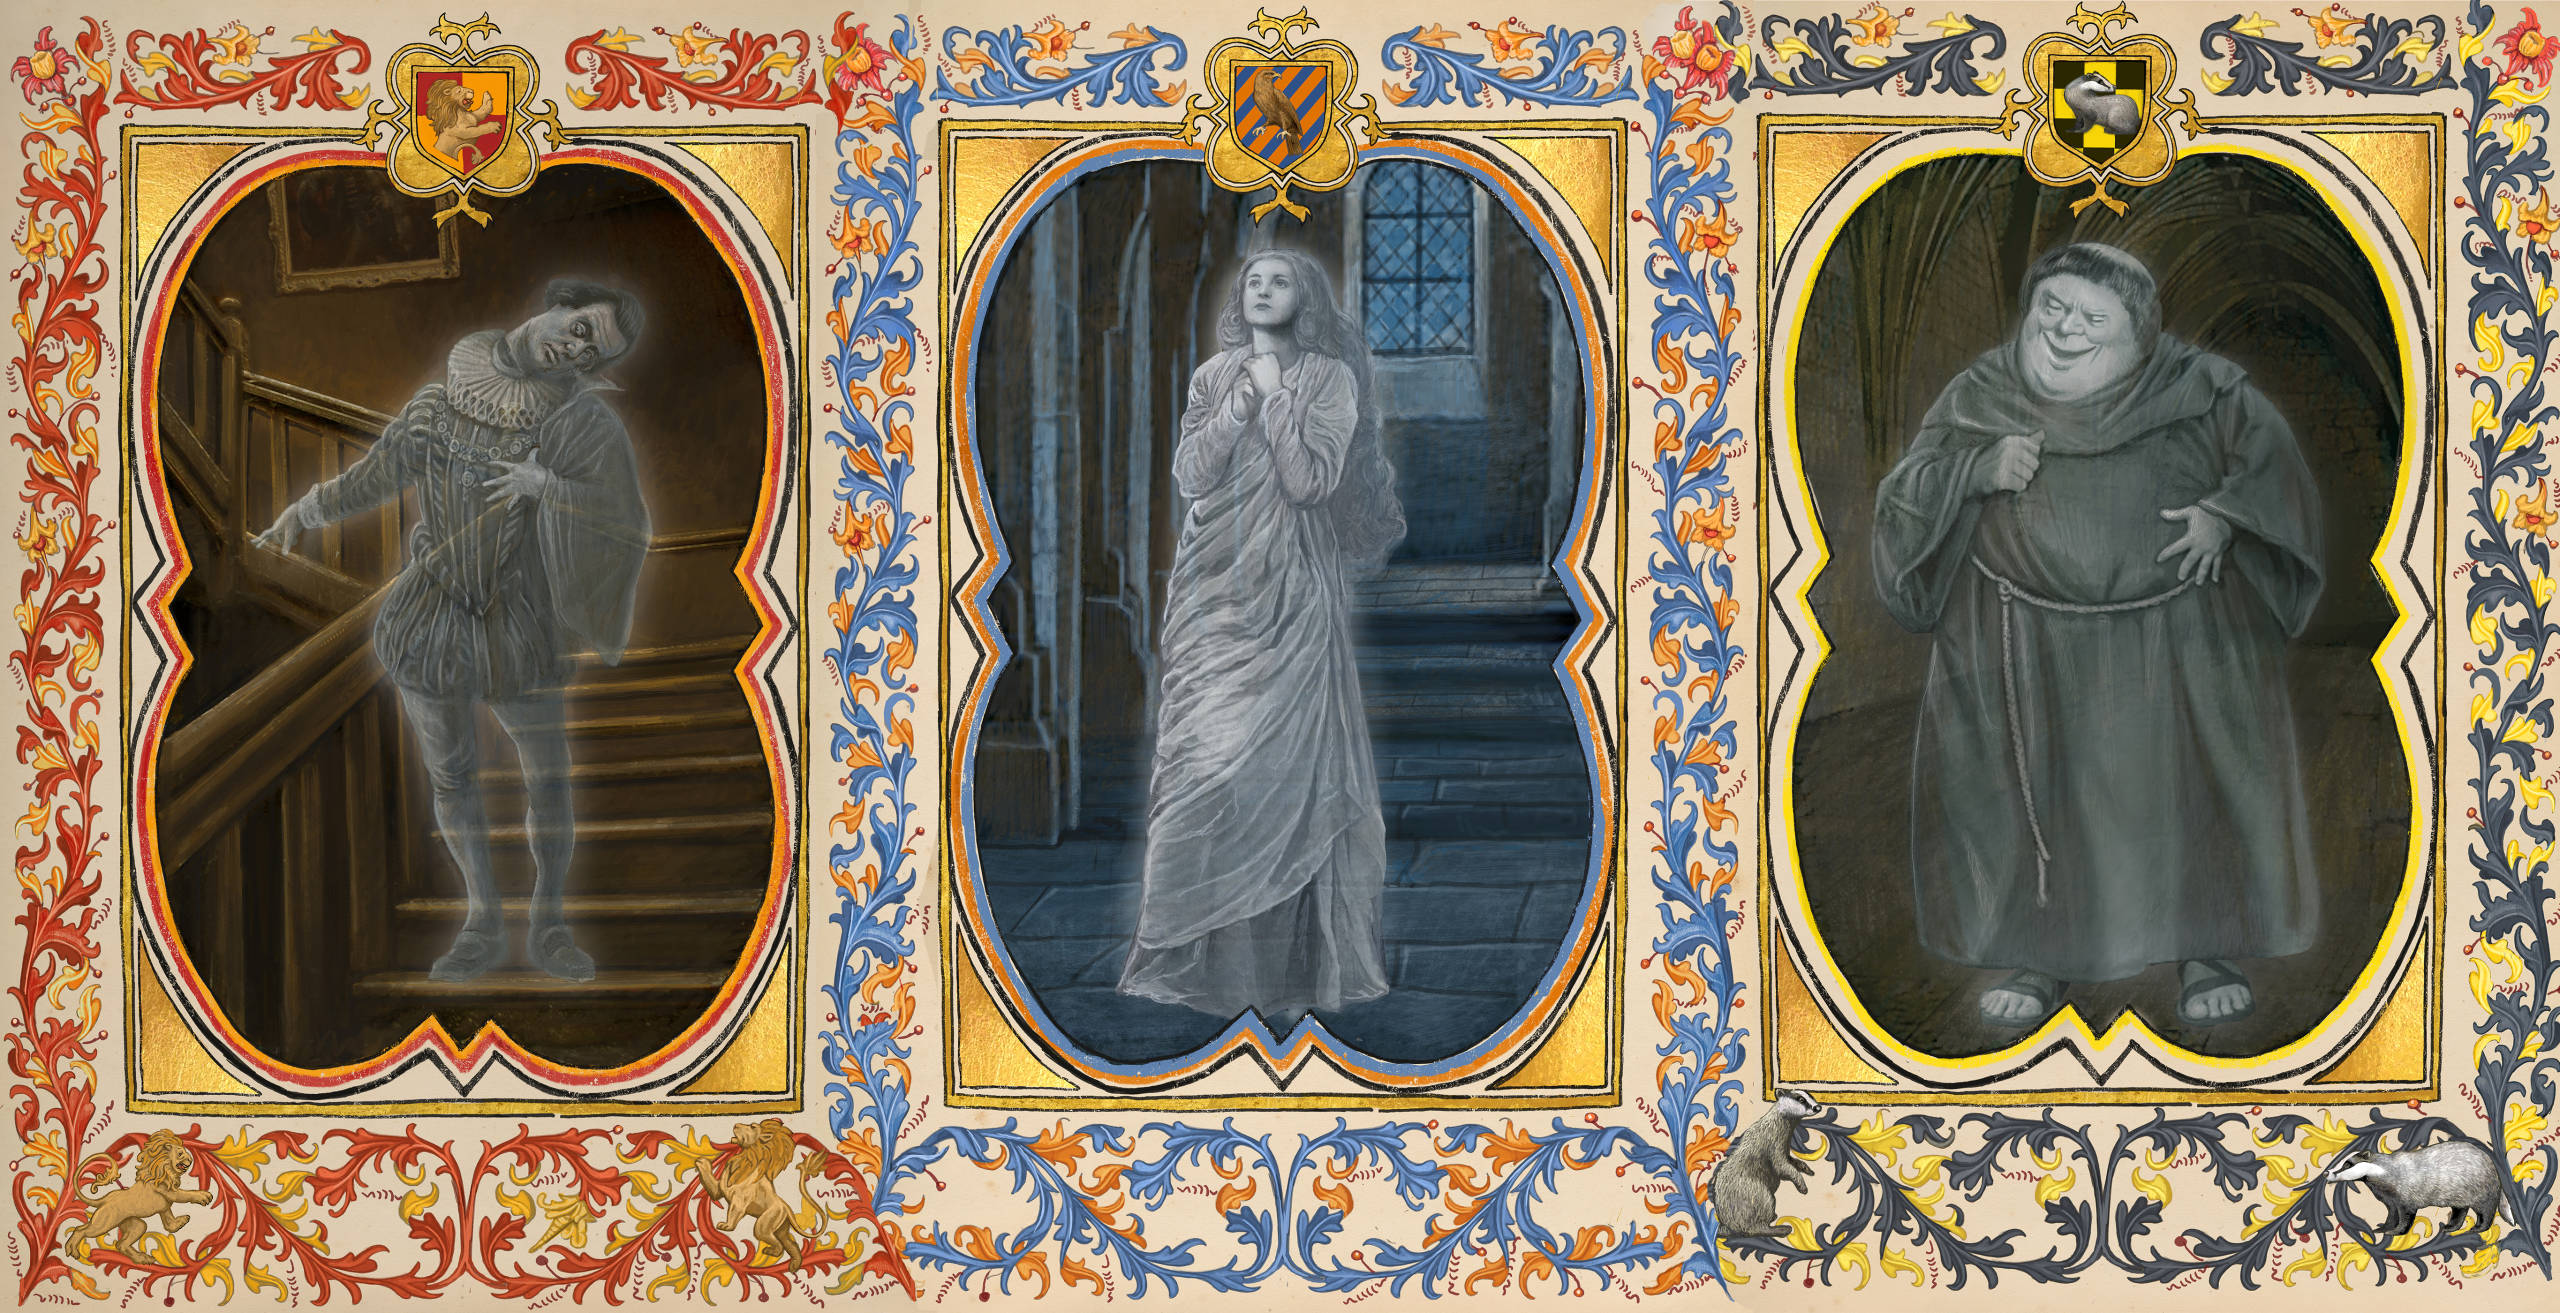 Hero image from the Hogwarts Ghosts portrait feature